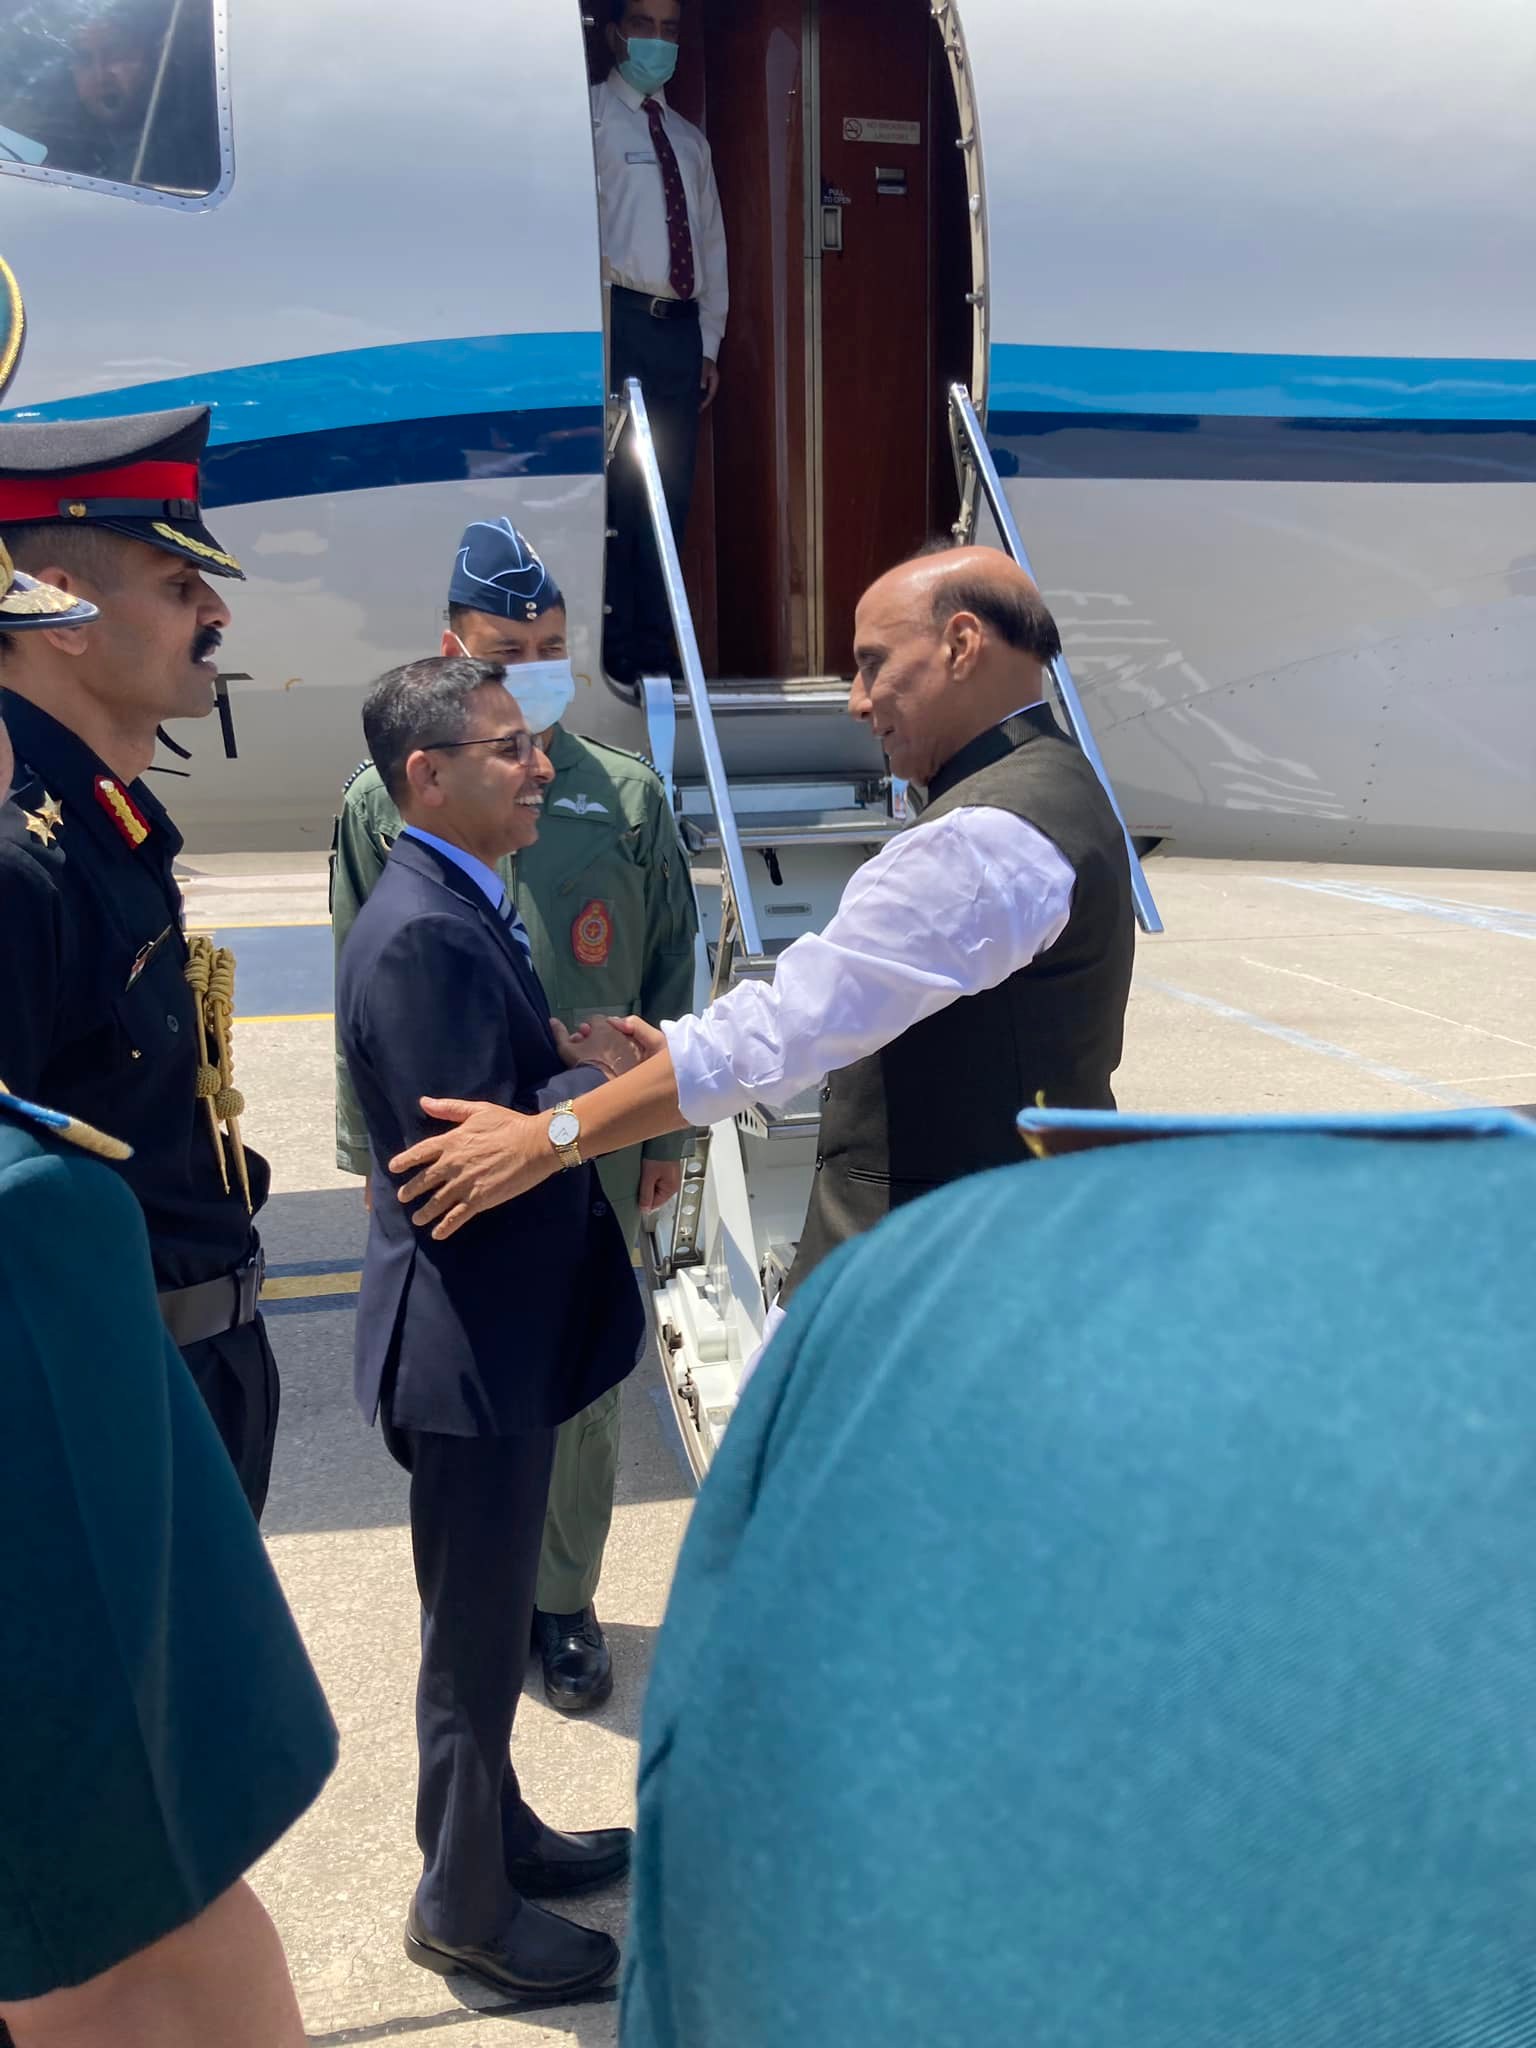 Raksha Mantri being seen off by Ambassador at the Cam Ranh International Airport before departing for India at the end of his visit (10 June 2022) 